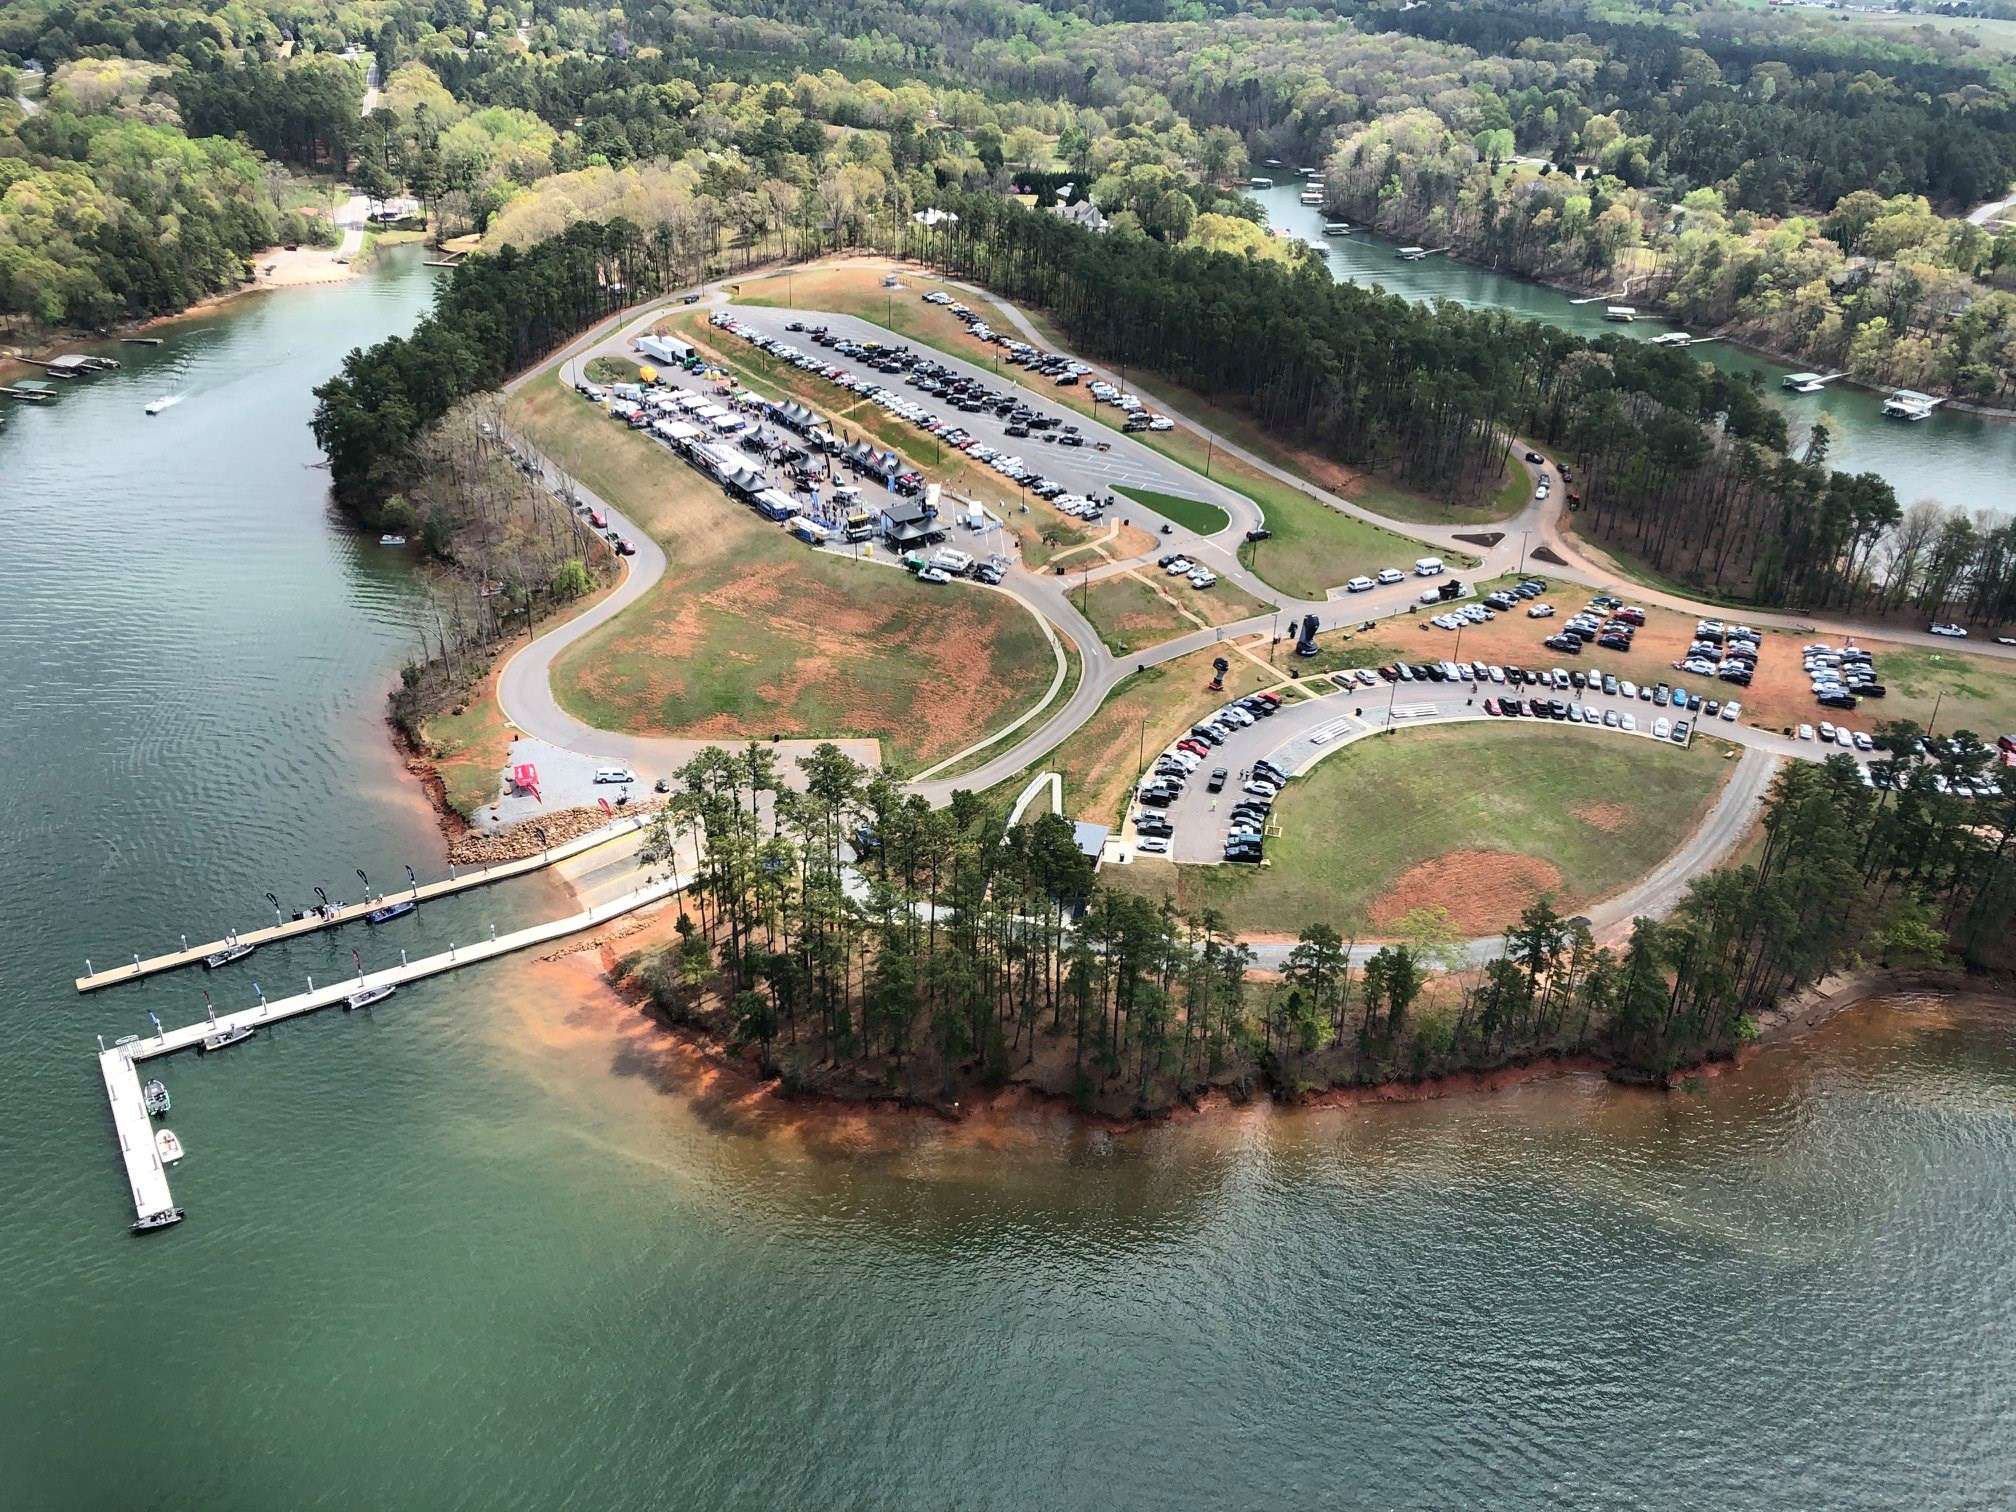 Hartwell is the site of three previous Bassmaster Classics and six major B.A.S.S. events.